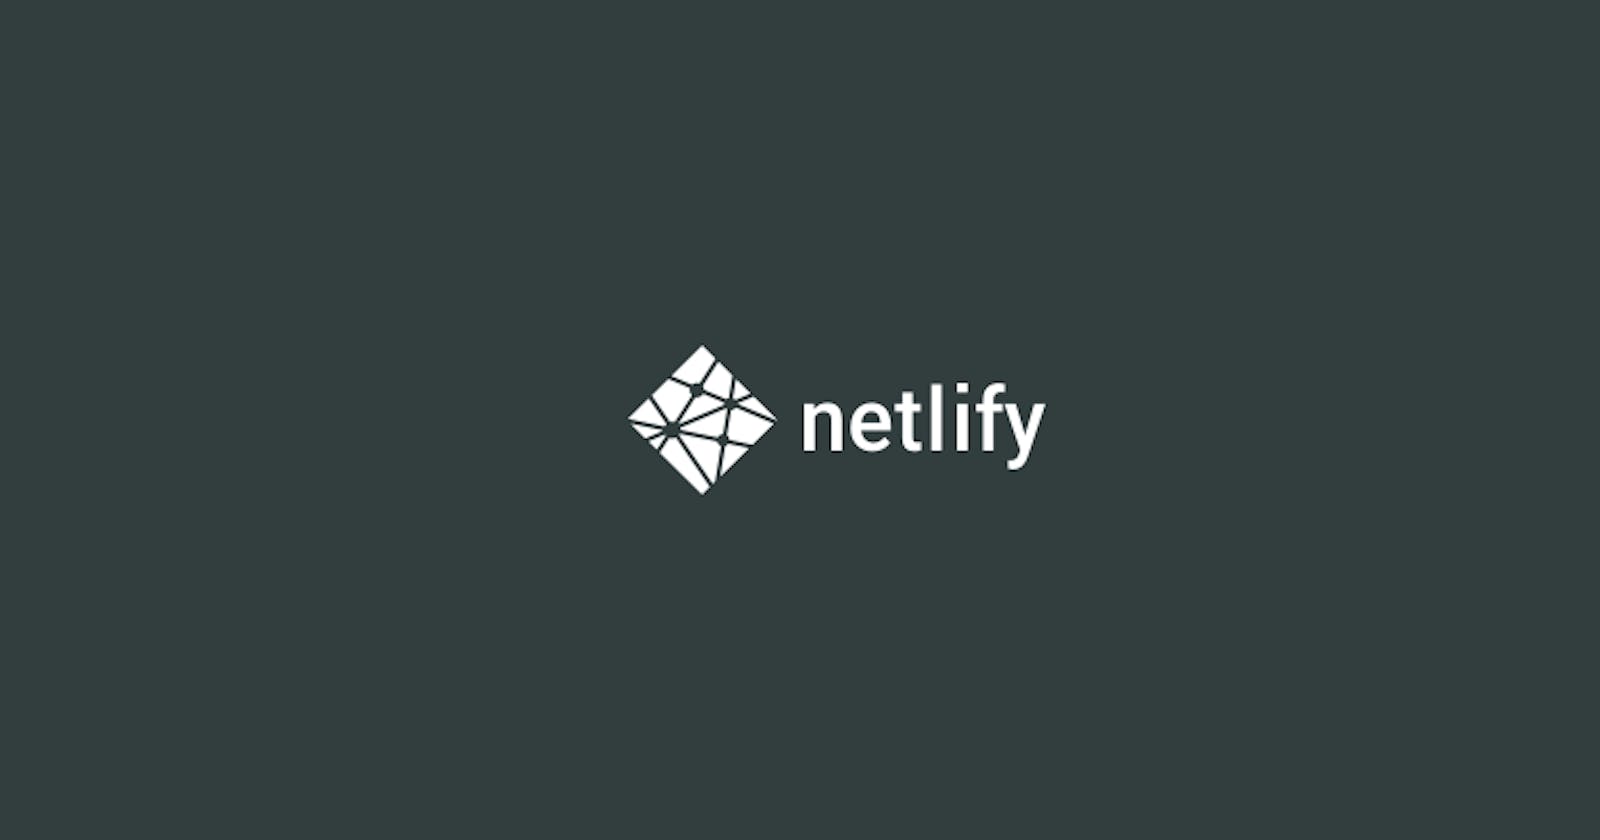 Hosting your site on Netlify